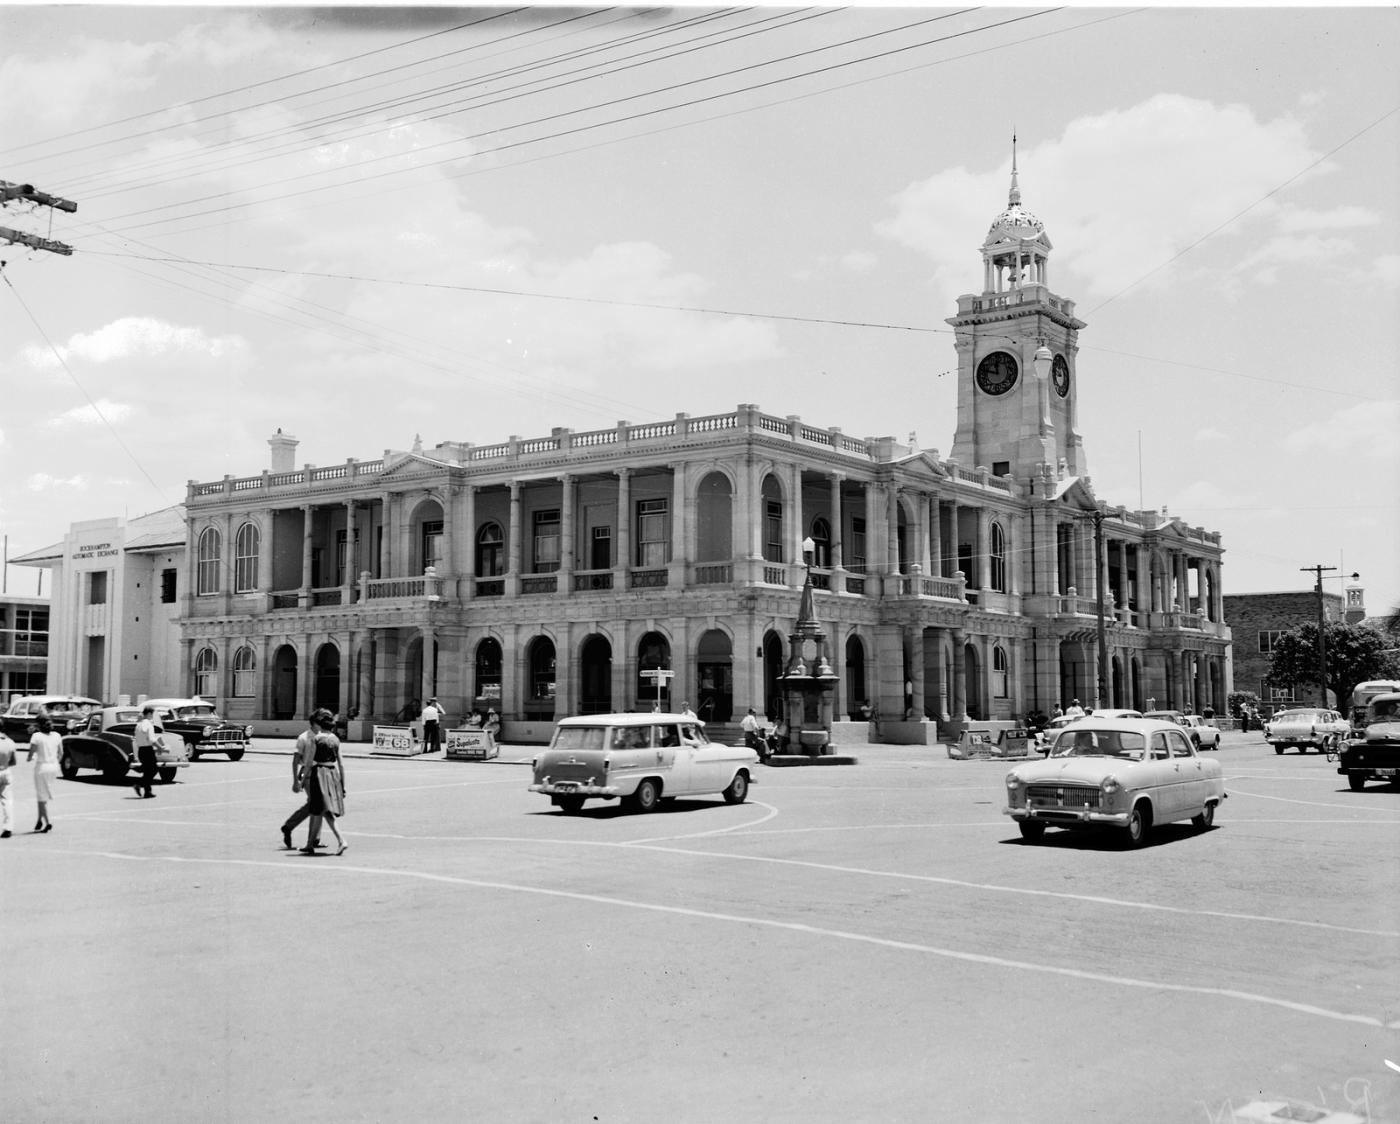 External view of the Rockhampton post office, a grand Victorian building with clock tower and stone walls